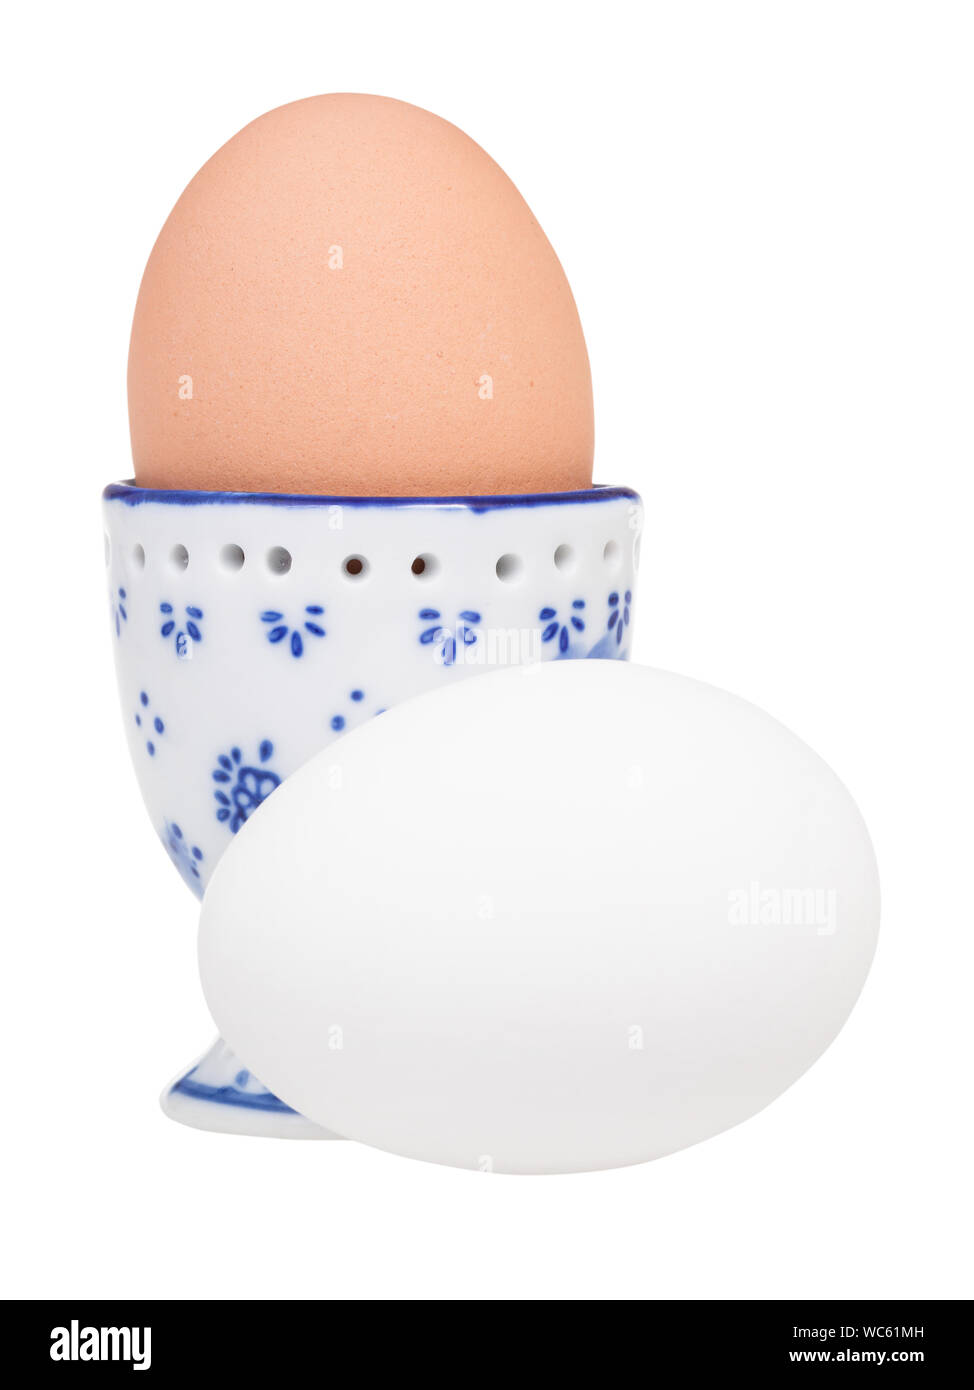 https://c8.alamy.com/comp/WC61MH/side-view-of-brown-boiled-egg-in-ceramic-egg-cup-and-white-egg-isolated-on-white-background-WC61MH.jpg